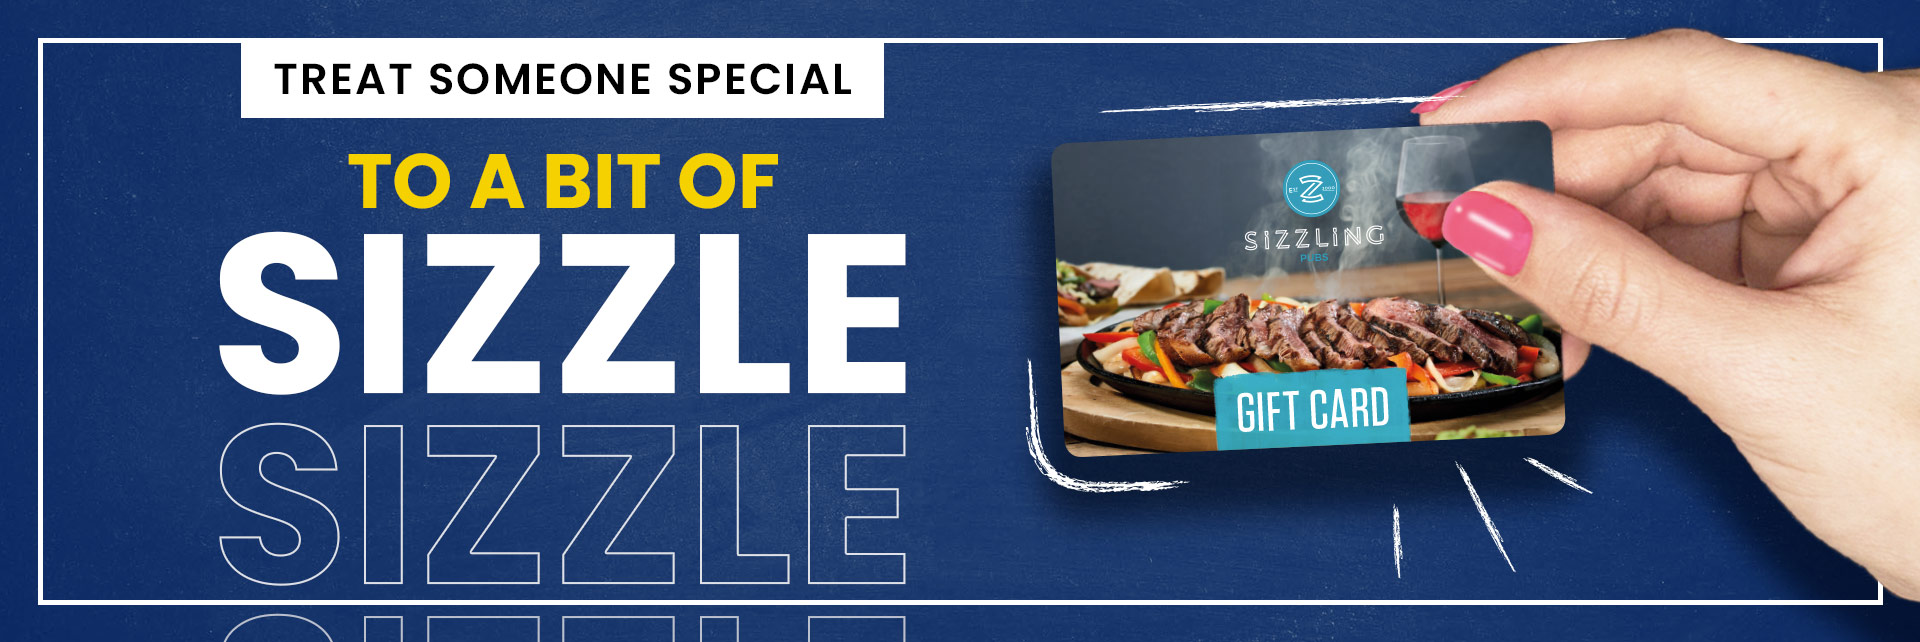 Sizzling Pubs Gift Card at The Moorland Inn in Stoke On Trent